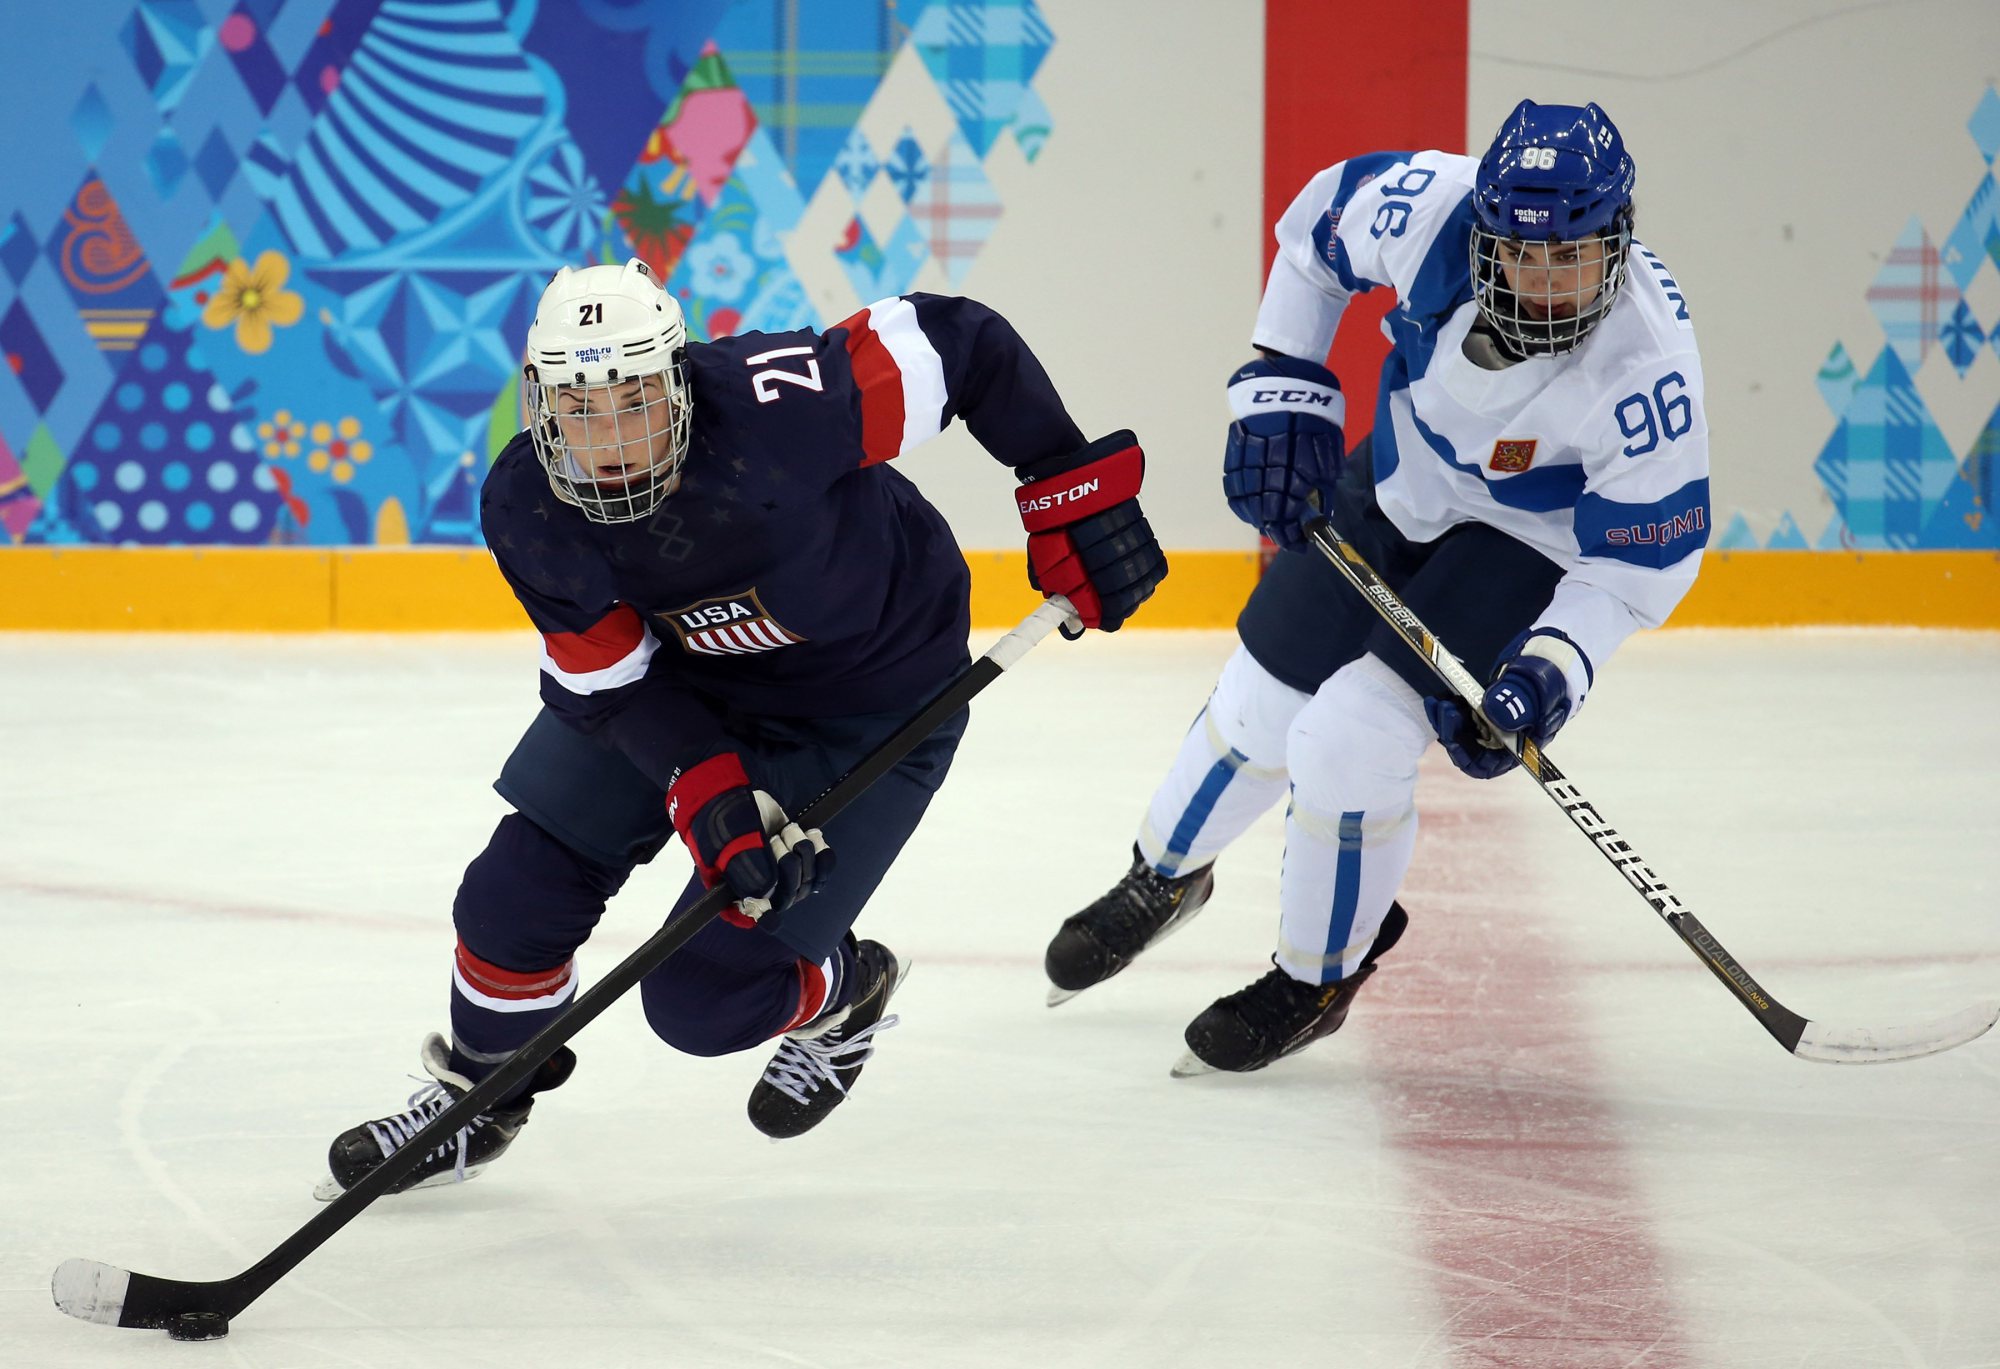 From left: U.S. forward Hilary Knight (21) skates ahead of Finland's Emma Nuutinen (96) during the second period in a women's hockey game at the 2014 Winter Olympics in Sochi, on Feb. 8, 2014. (Brian Cassella&mdash;Zuma Press)